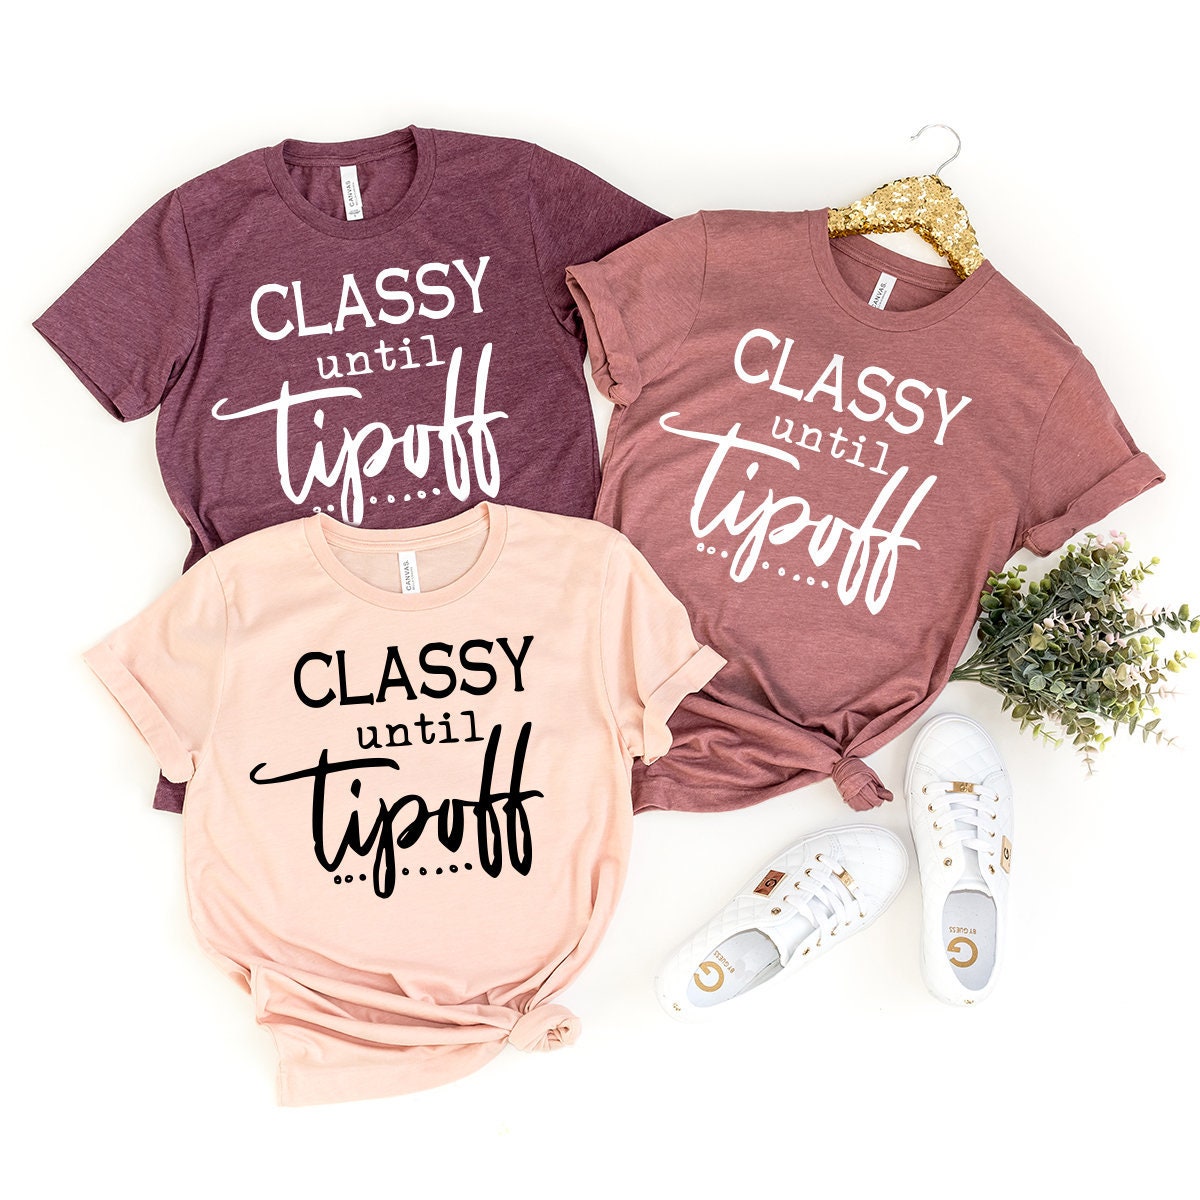 Classy Until Tipoff Shirt, Basketball Mama Shirt, Funny Basketball Shirt, Sports Mom Shirt, Basketball Mother Tee, Mothers Day Shirt - Fastdeliverytees.com